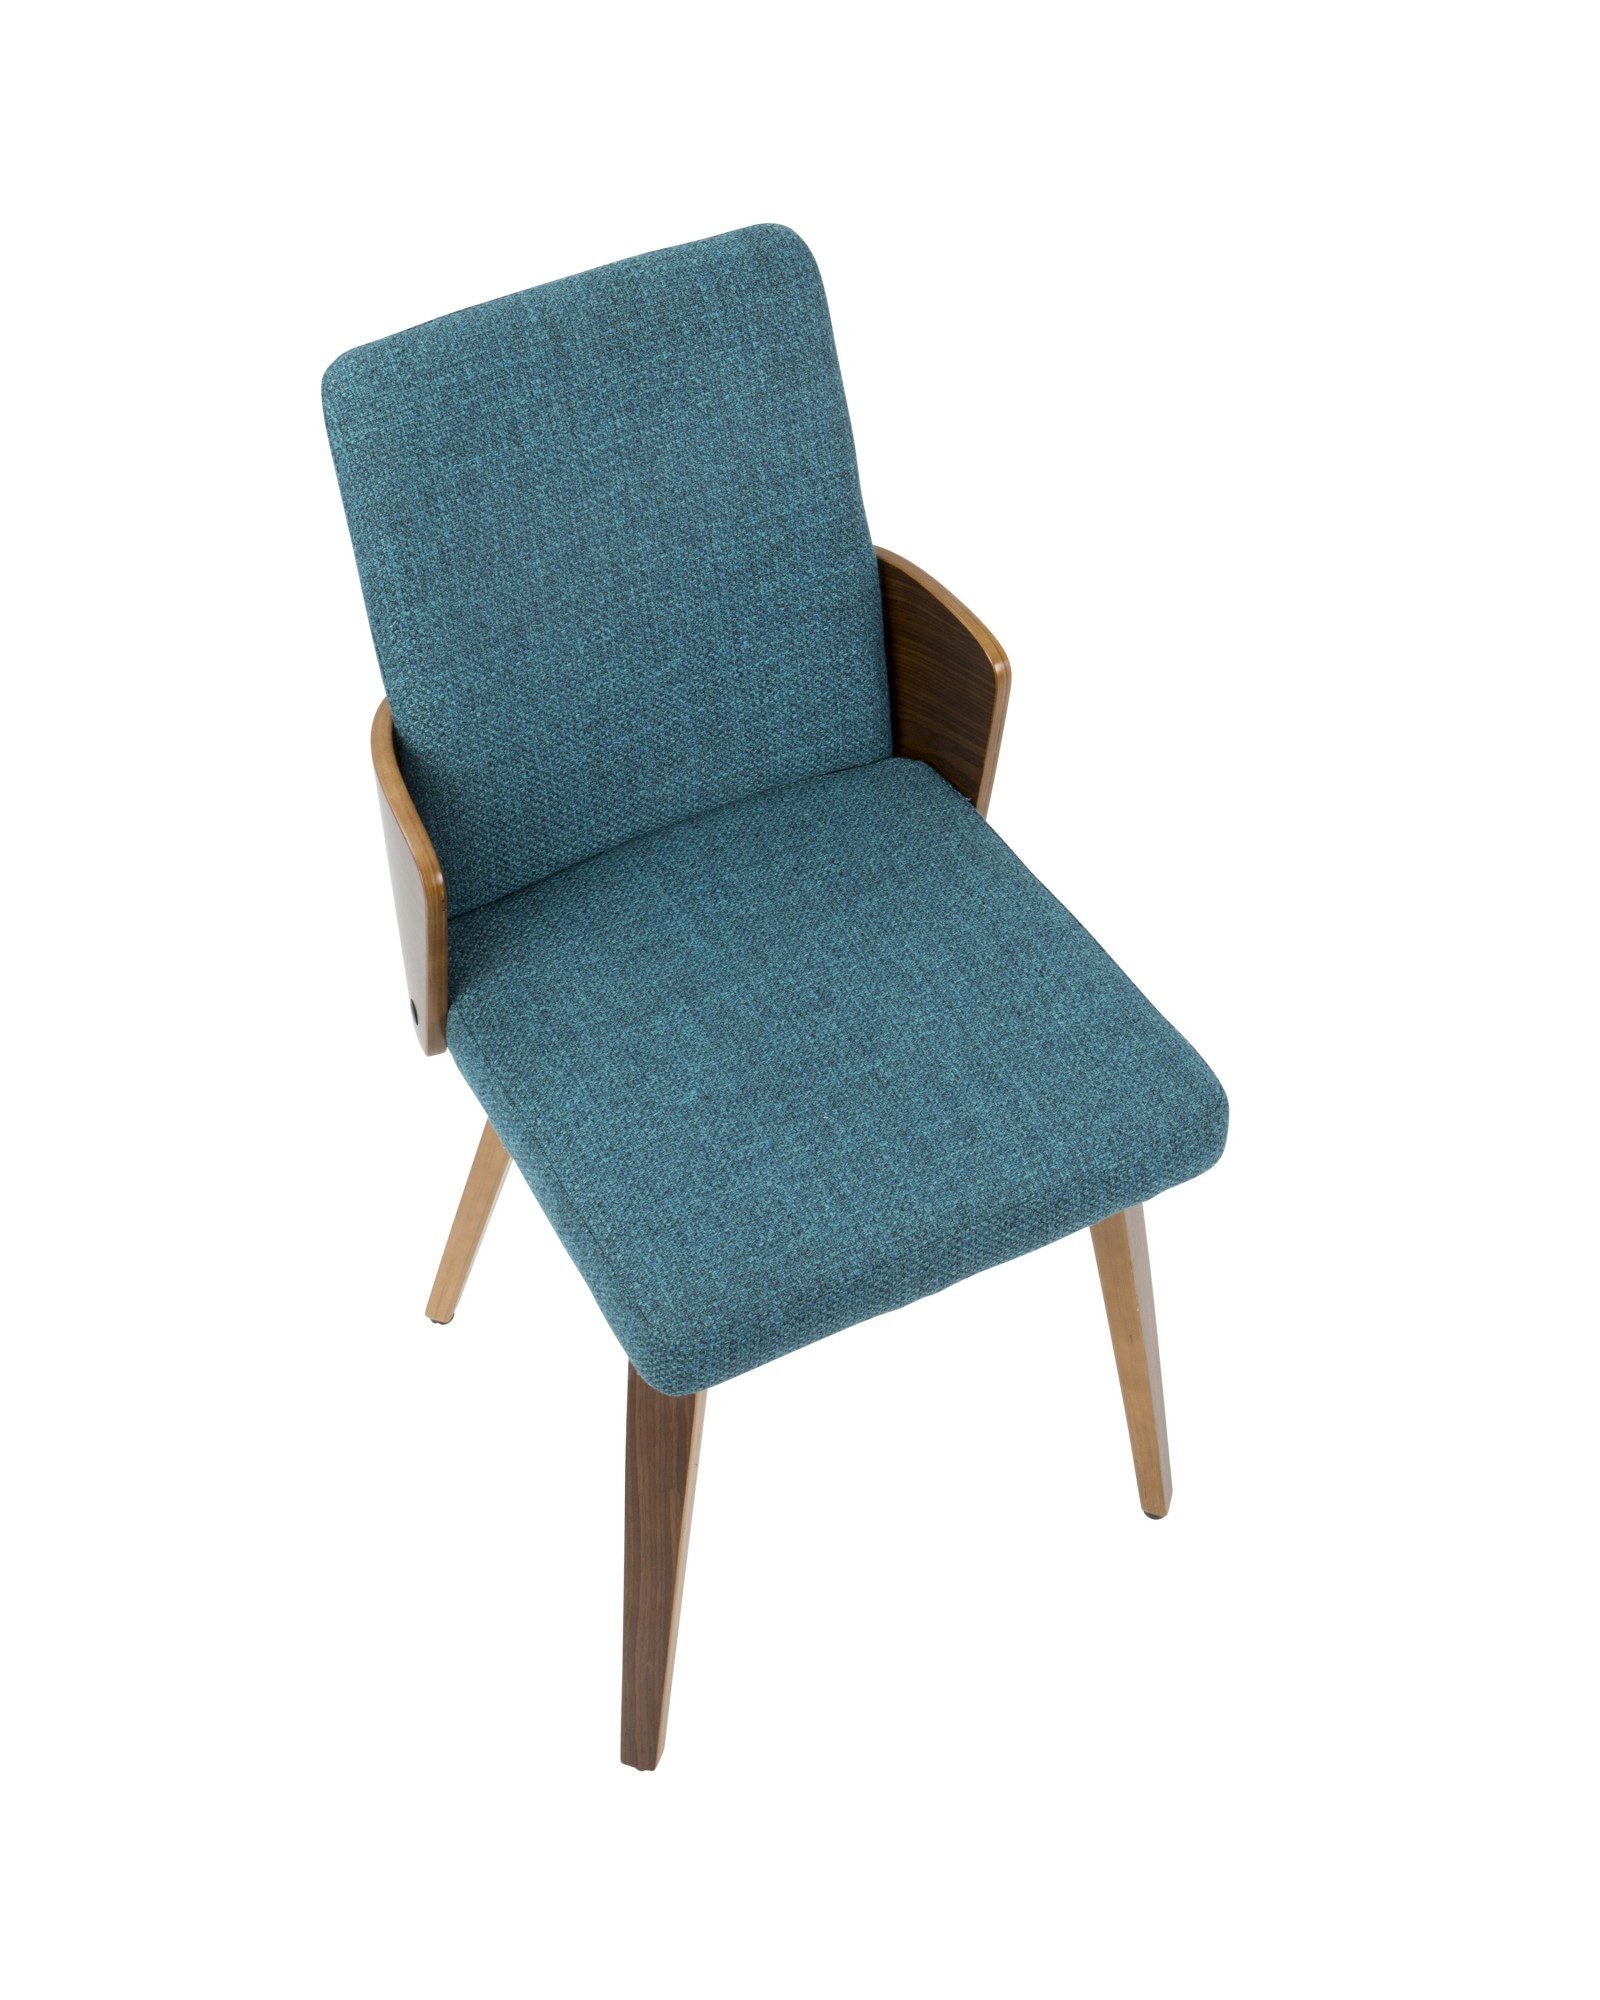 Carmella Mid-Century Modern Dining/Accent Chair in Walnut and Teal Fabric - Set of 2